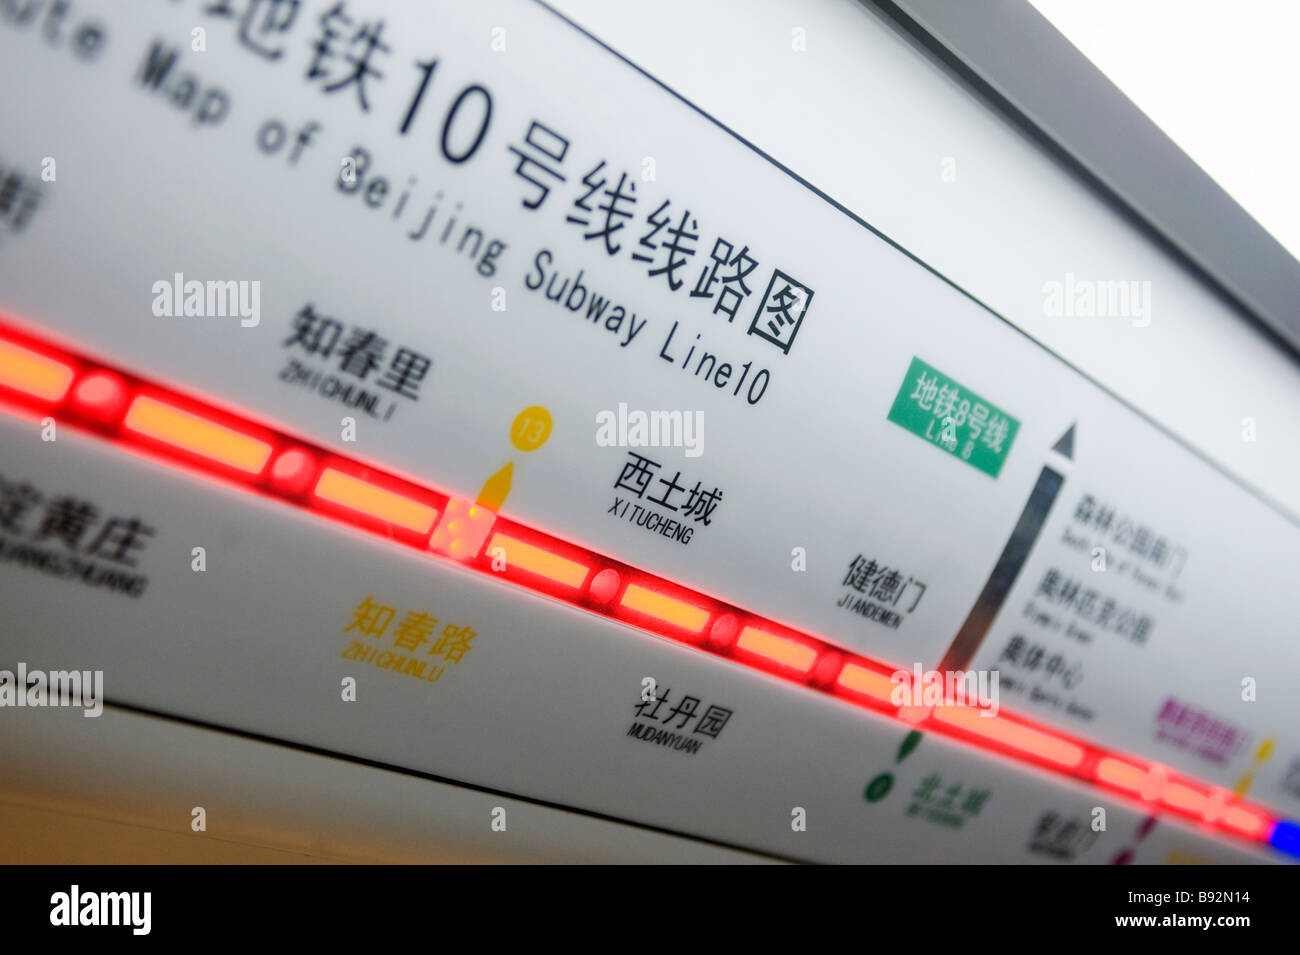 Detail of electronic route display in new subway train on Line 10 in Beijing Stock Photo